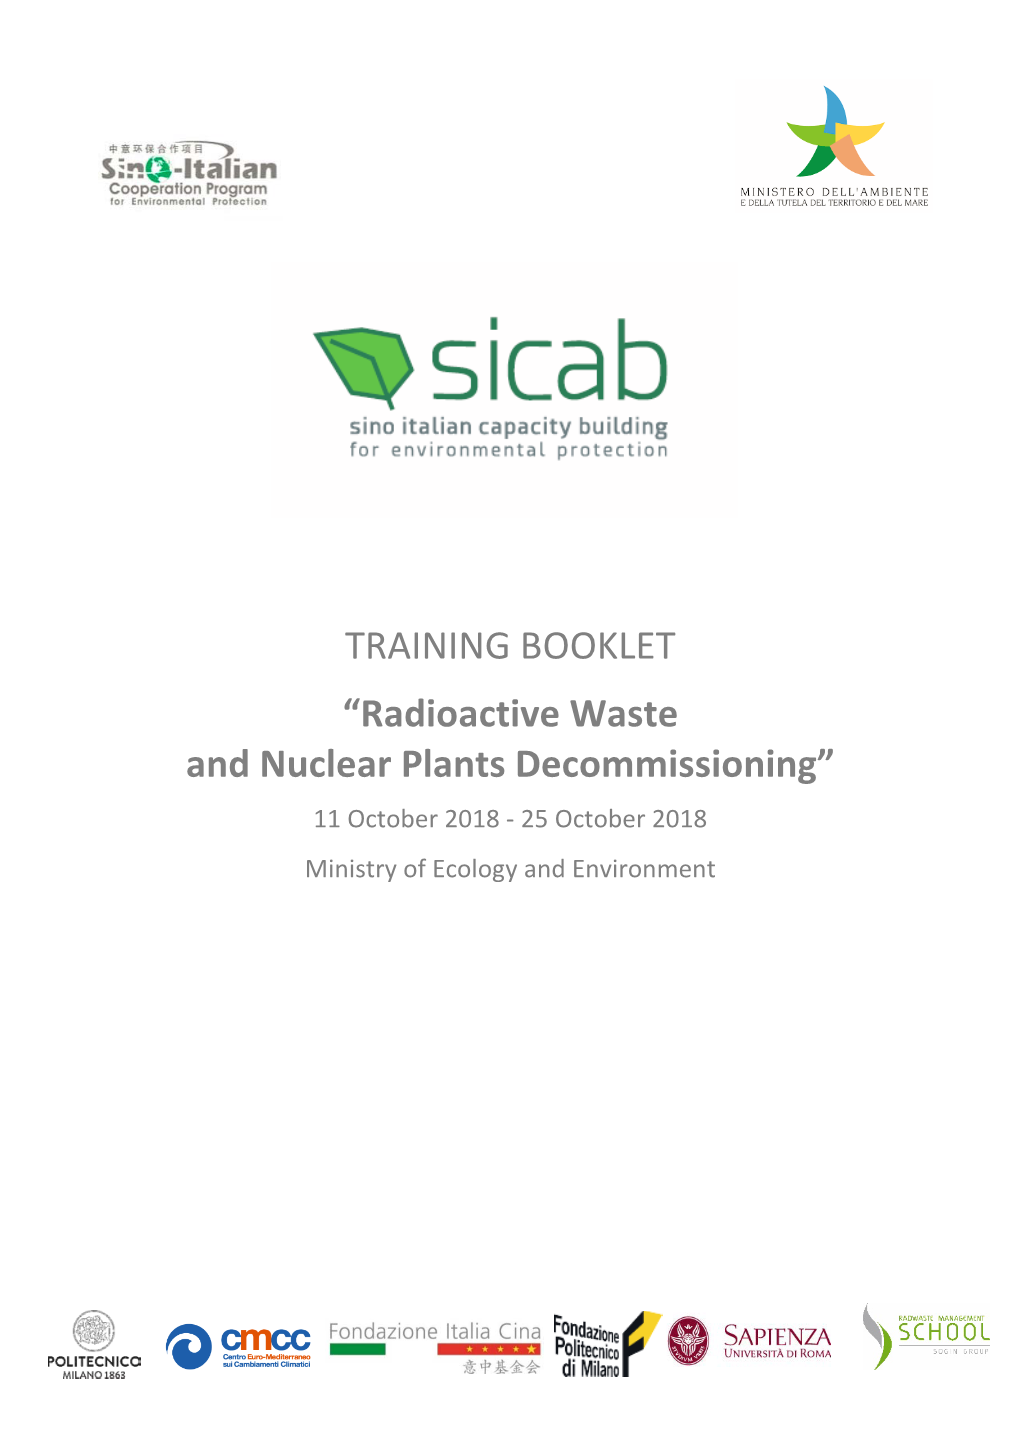 Radioactive Waste and Nuclear Plants Decommissioning” 11 October 2018 - 25 October 2018 Ministry of Ecology and Environment